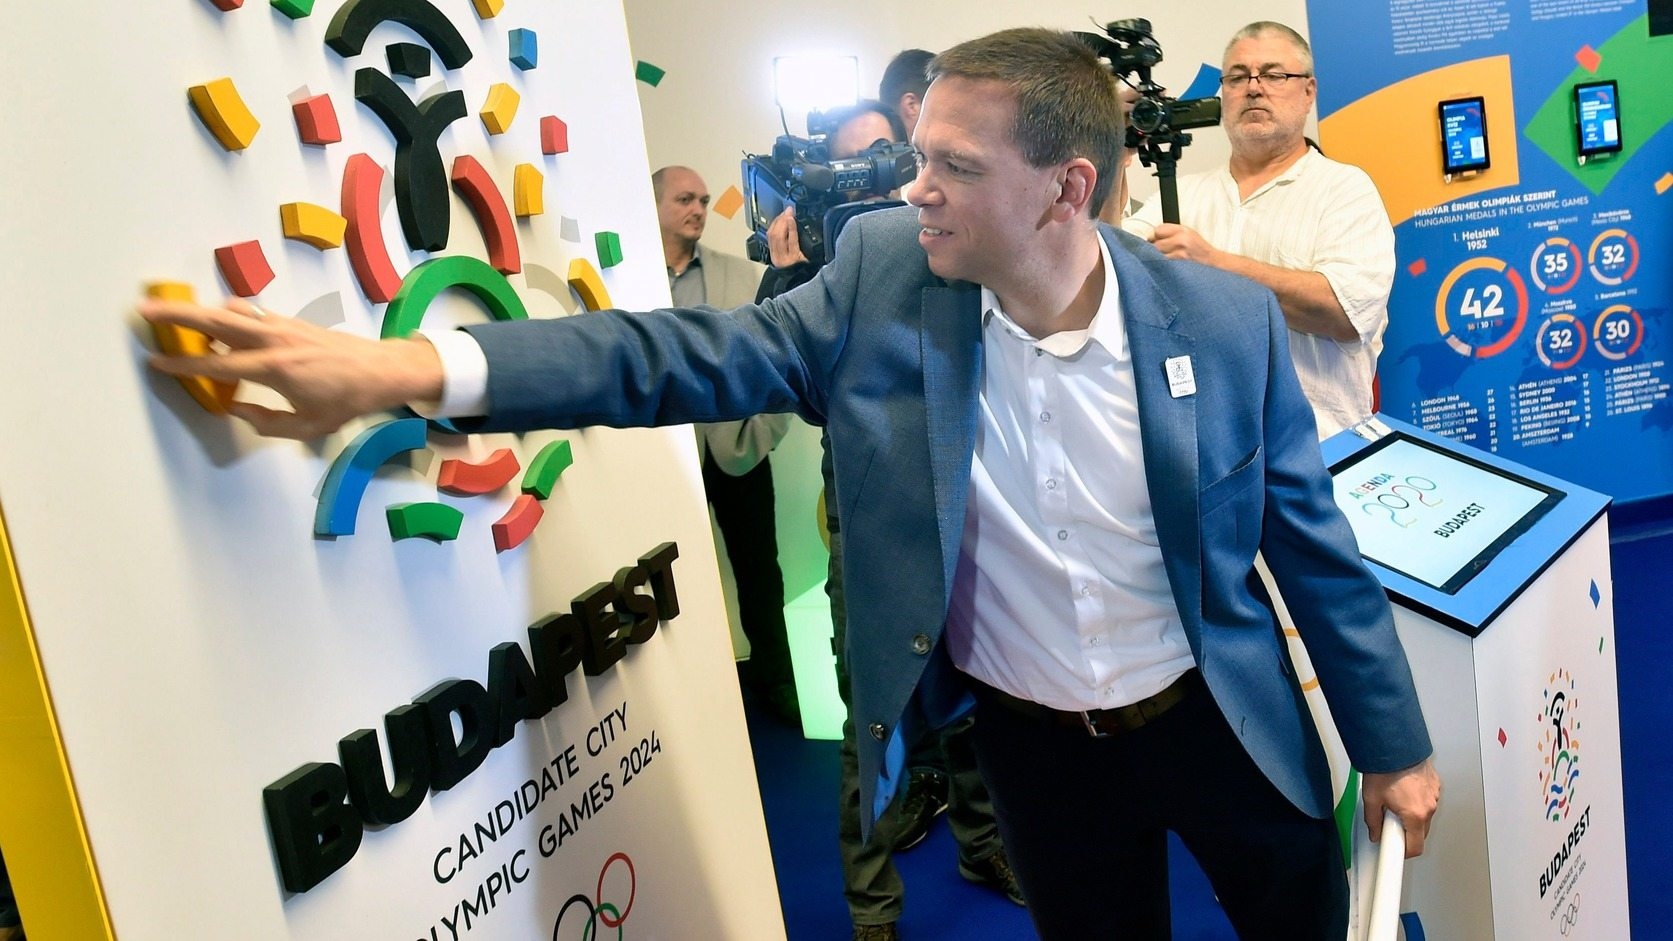 Balázs Fürjes led Budapest's bid for the 2024 Olympic Games which collapsed after the Momentum Movement secured enough votes for a referendum ©Budapest 2024